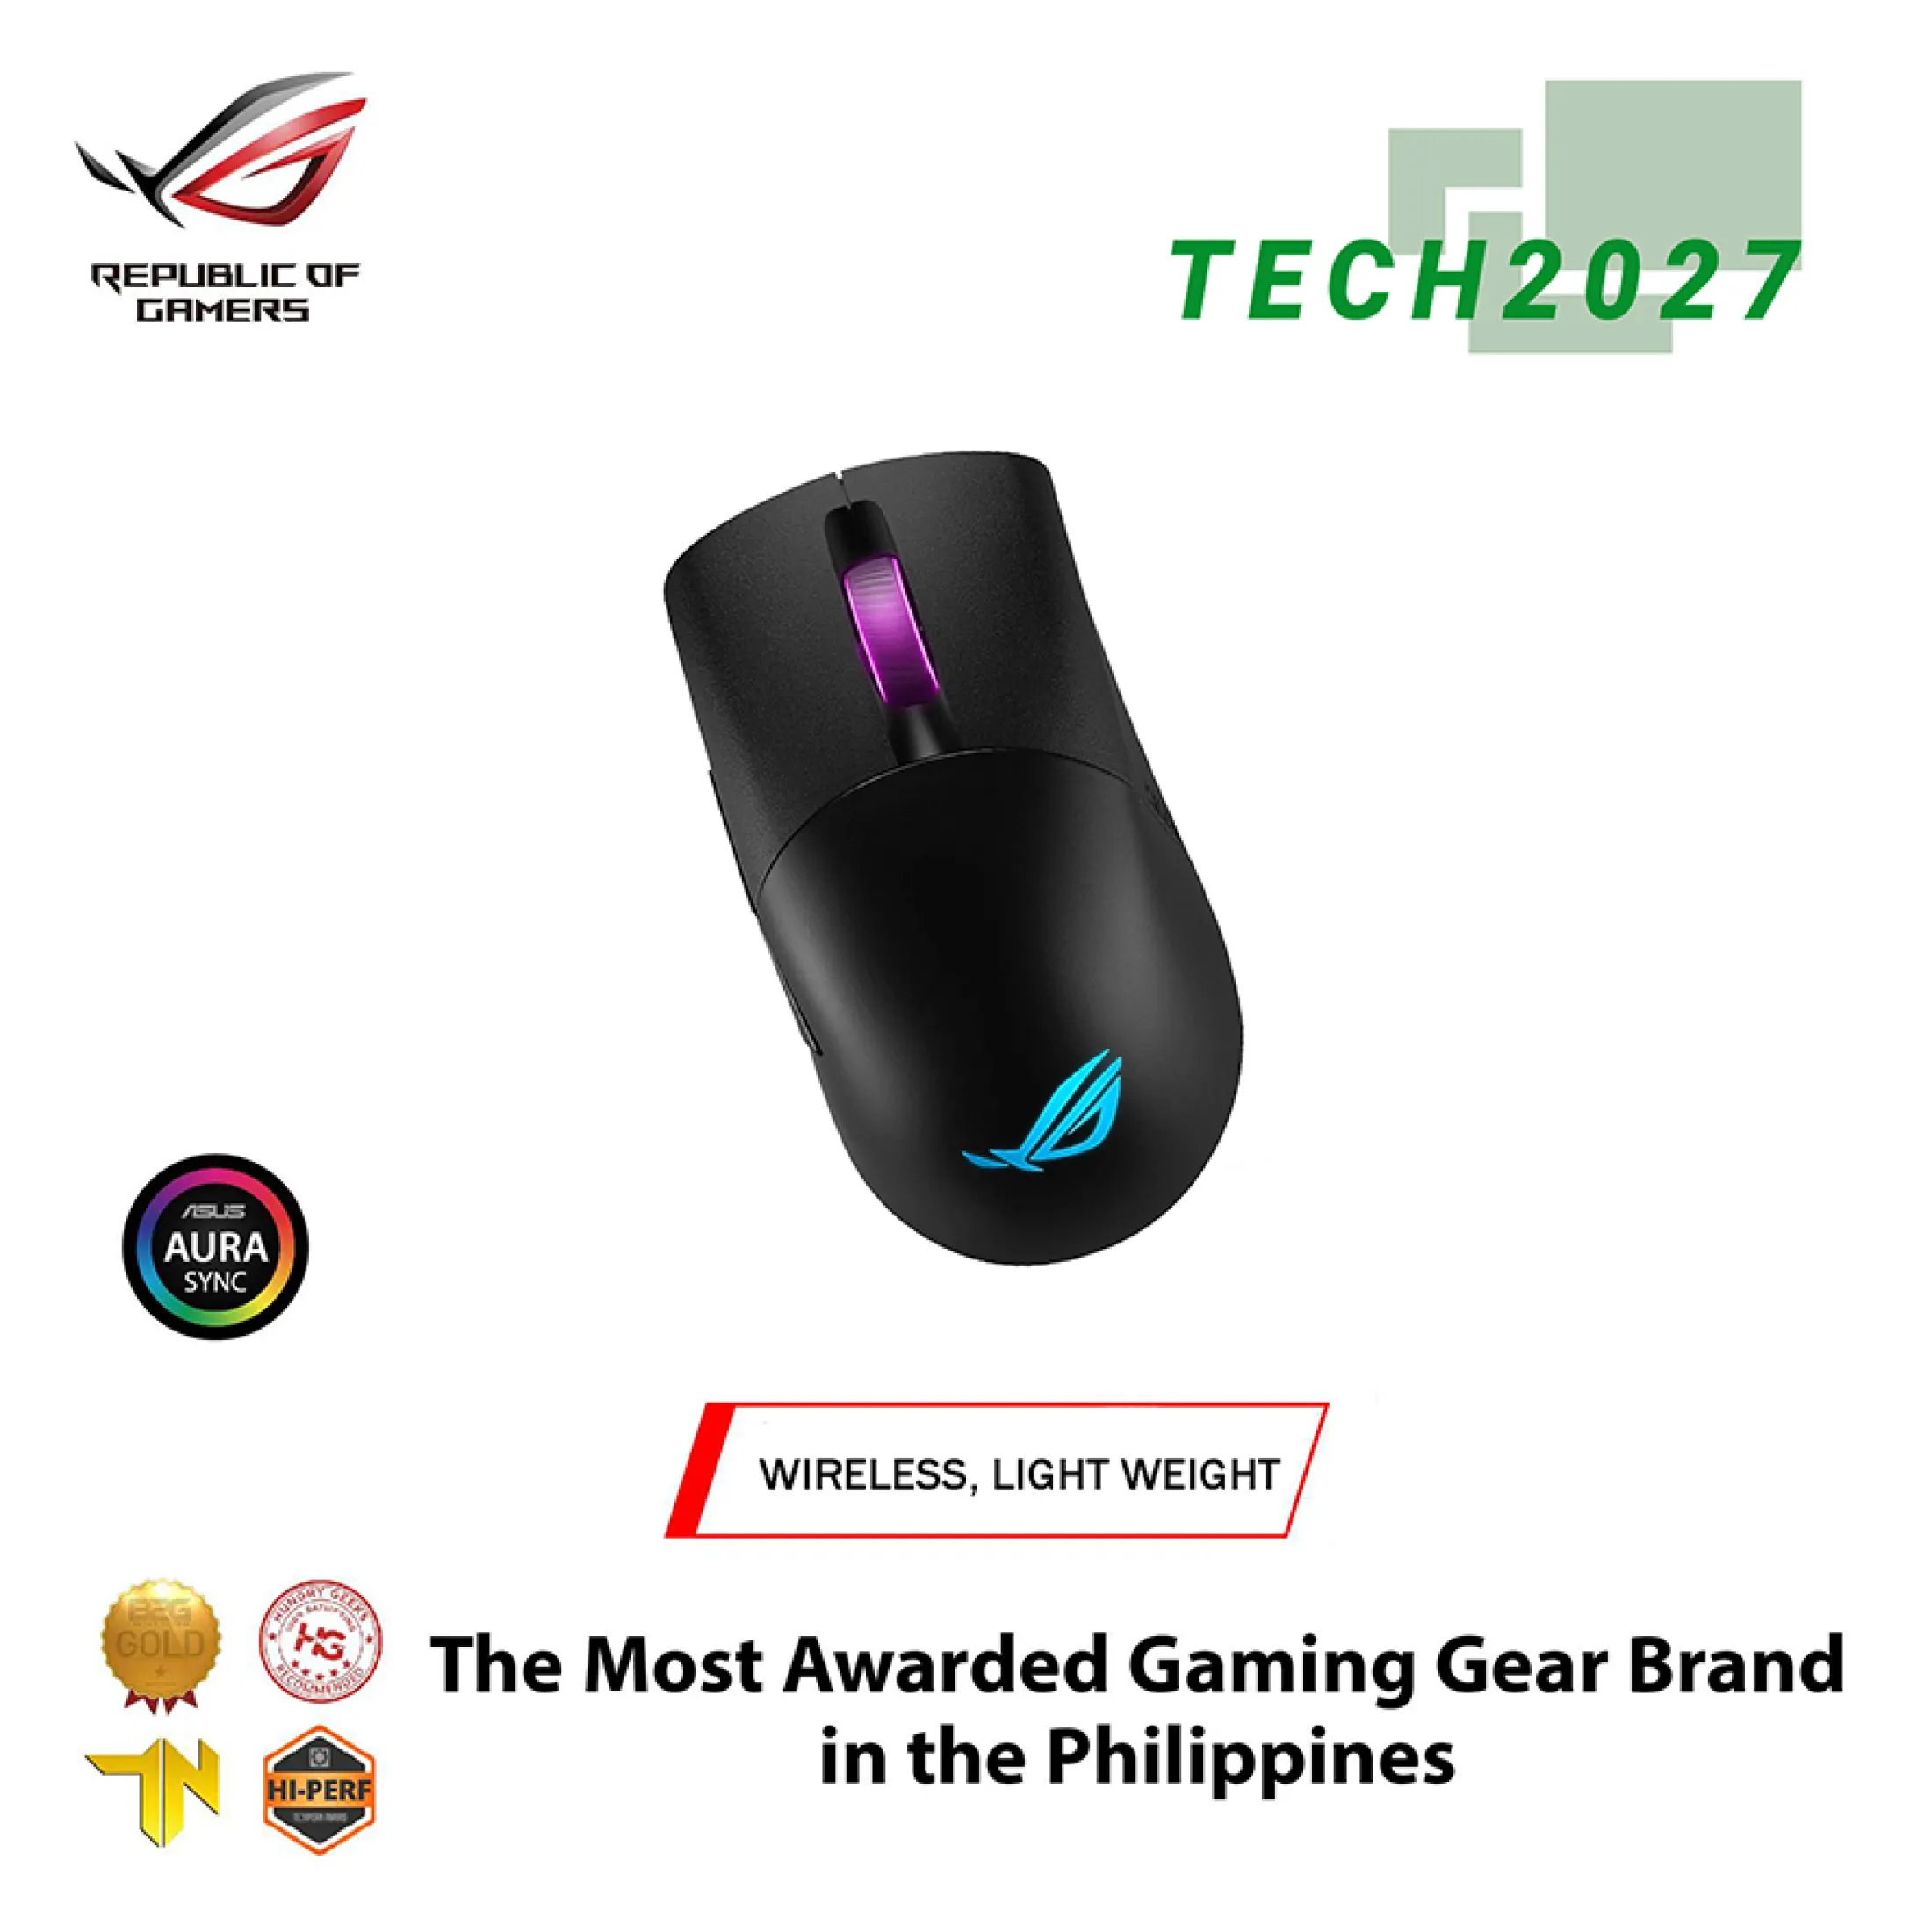 Asus Rog Keris Wireless Lightweight Gaming Mouse Rog 16 000 Dpi Sensor Push Fit Switch Sockets Swappable Side Buttons Rog Omni Mouse Feet Rog Paracord And Aura Sync Rgb Lighting Lazada Ph